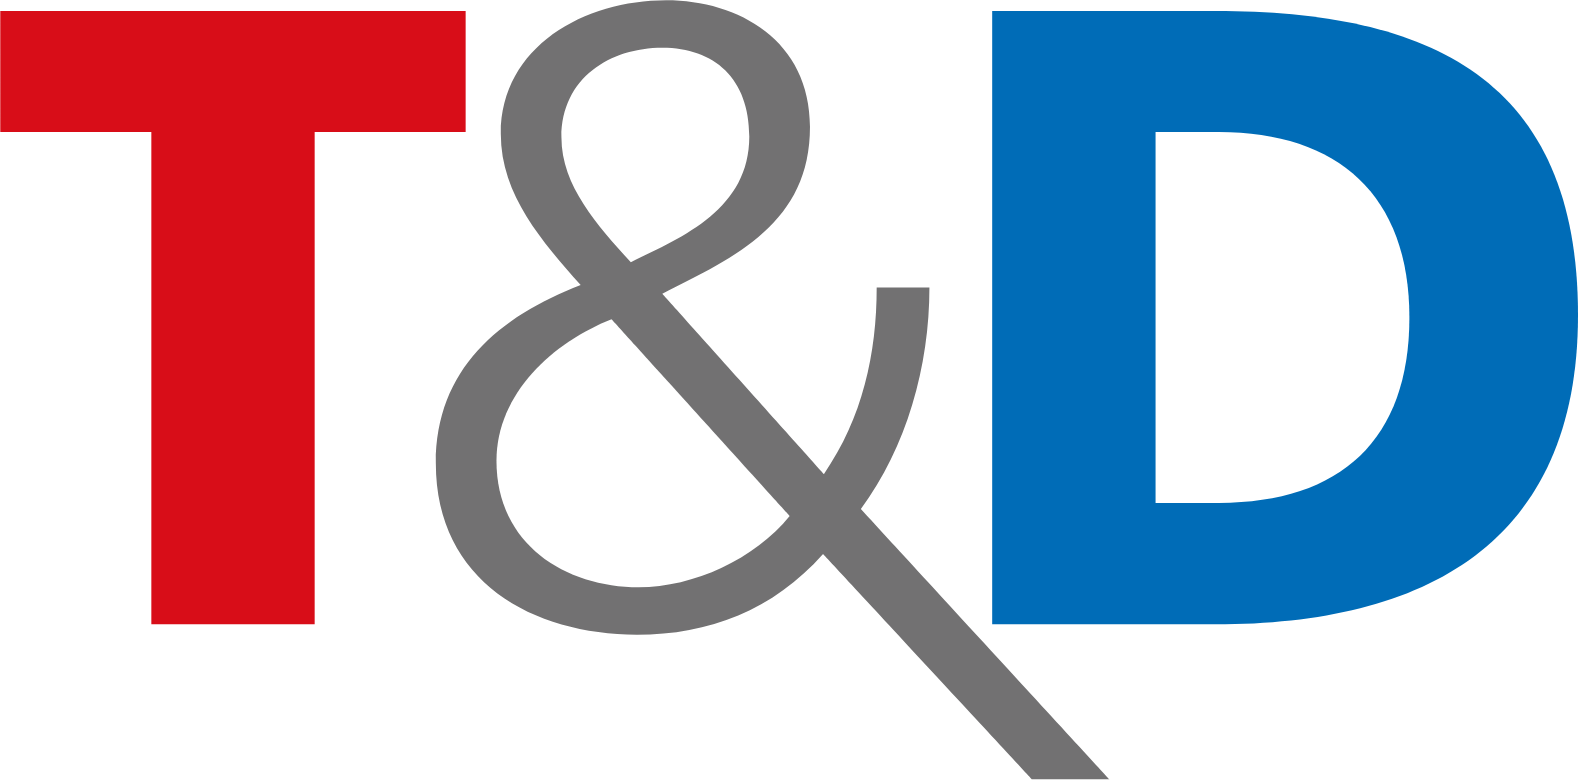 T&D Holdings logo in transparent PNG and vectorized SVG formats